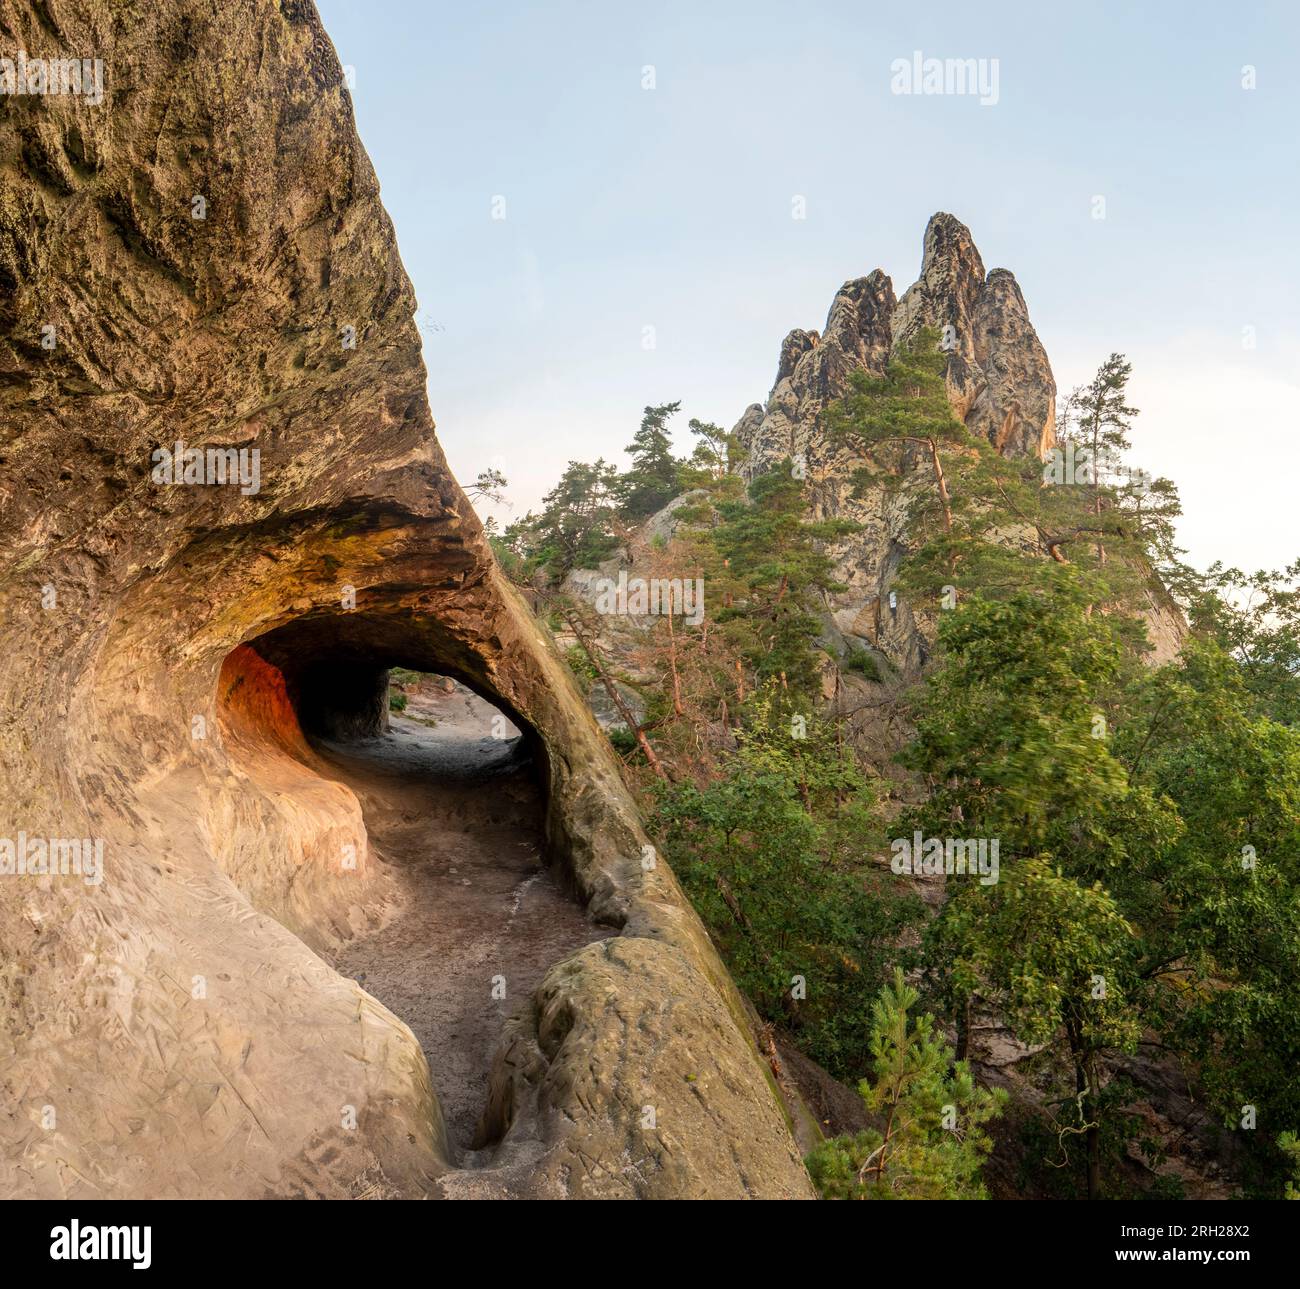 The first rays of sunlight of the day hit the Hamburg coat of arms. The bizarre sandstone formation belongs to the Devil's Wall in the Harz Mountains. Stock Photo